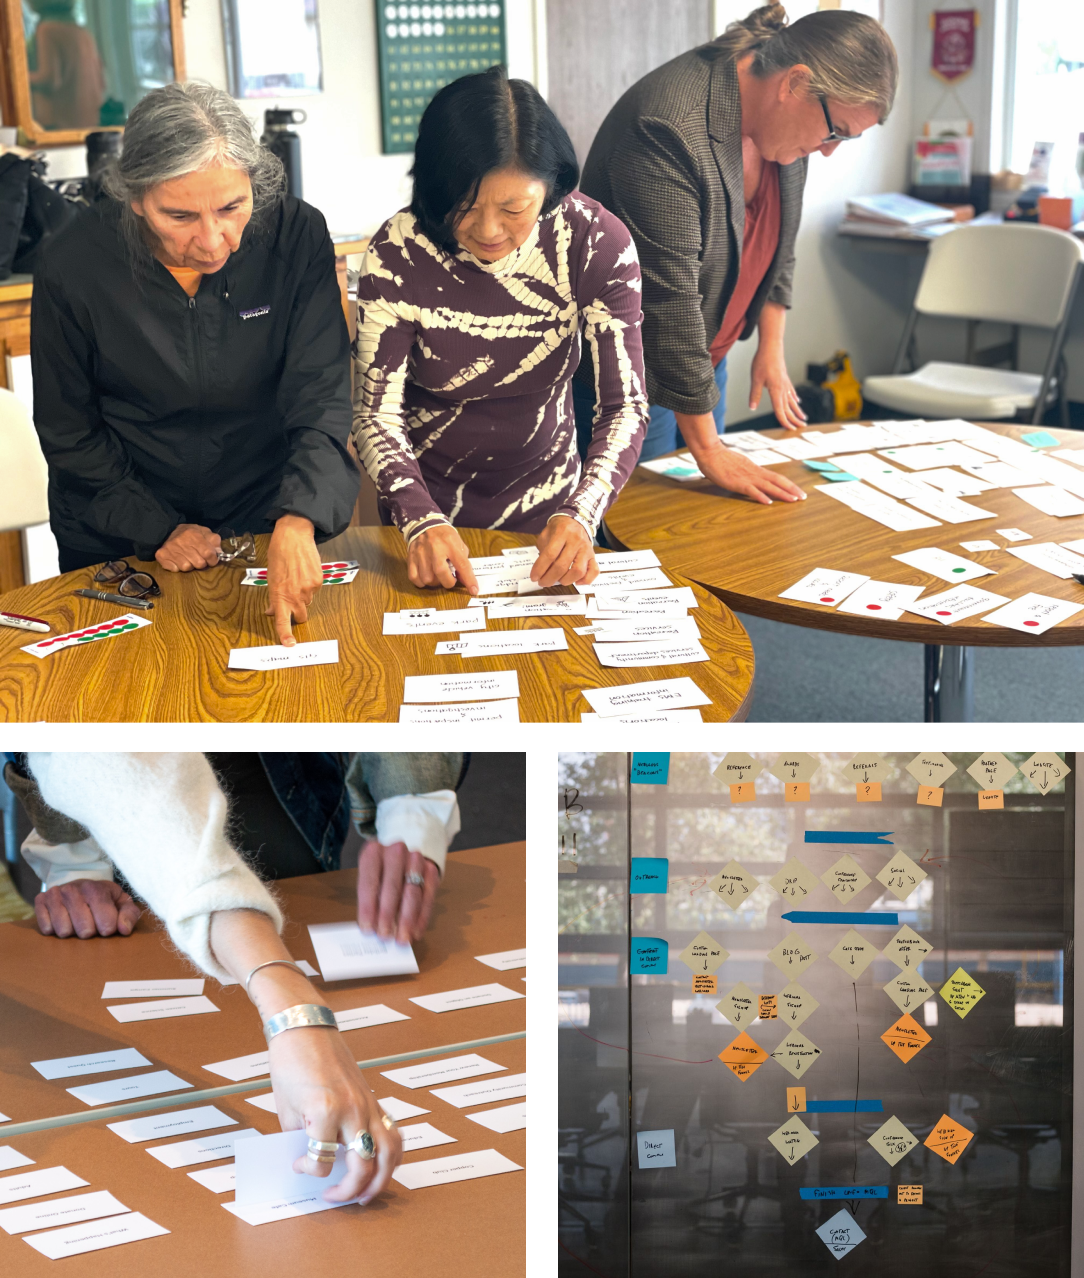 A collage of 3 photos. 3 people participating in a card-sorting exercise, a close-up of a card sorting exercise, a physical wireframe with sticky notes.